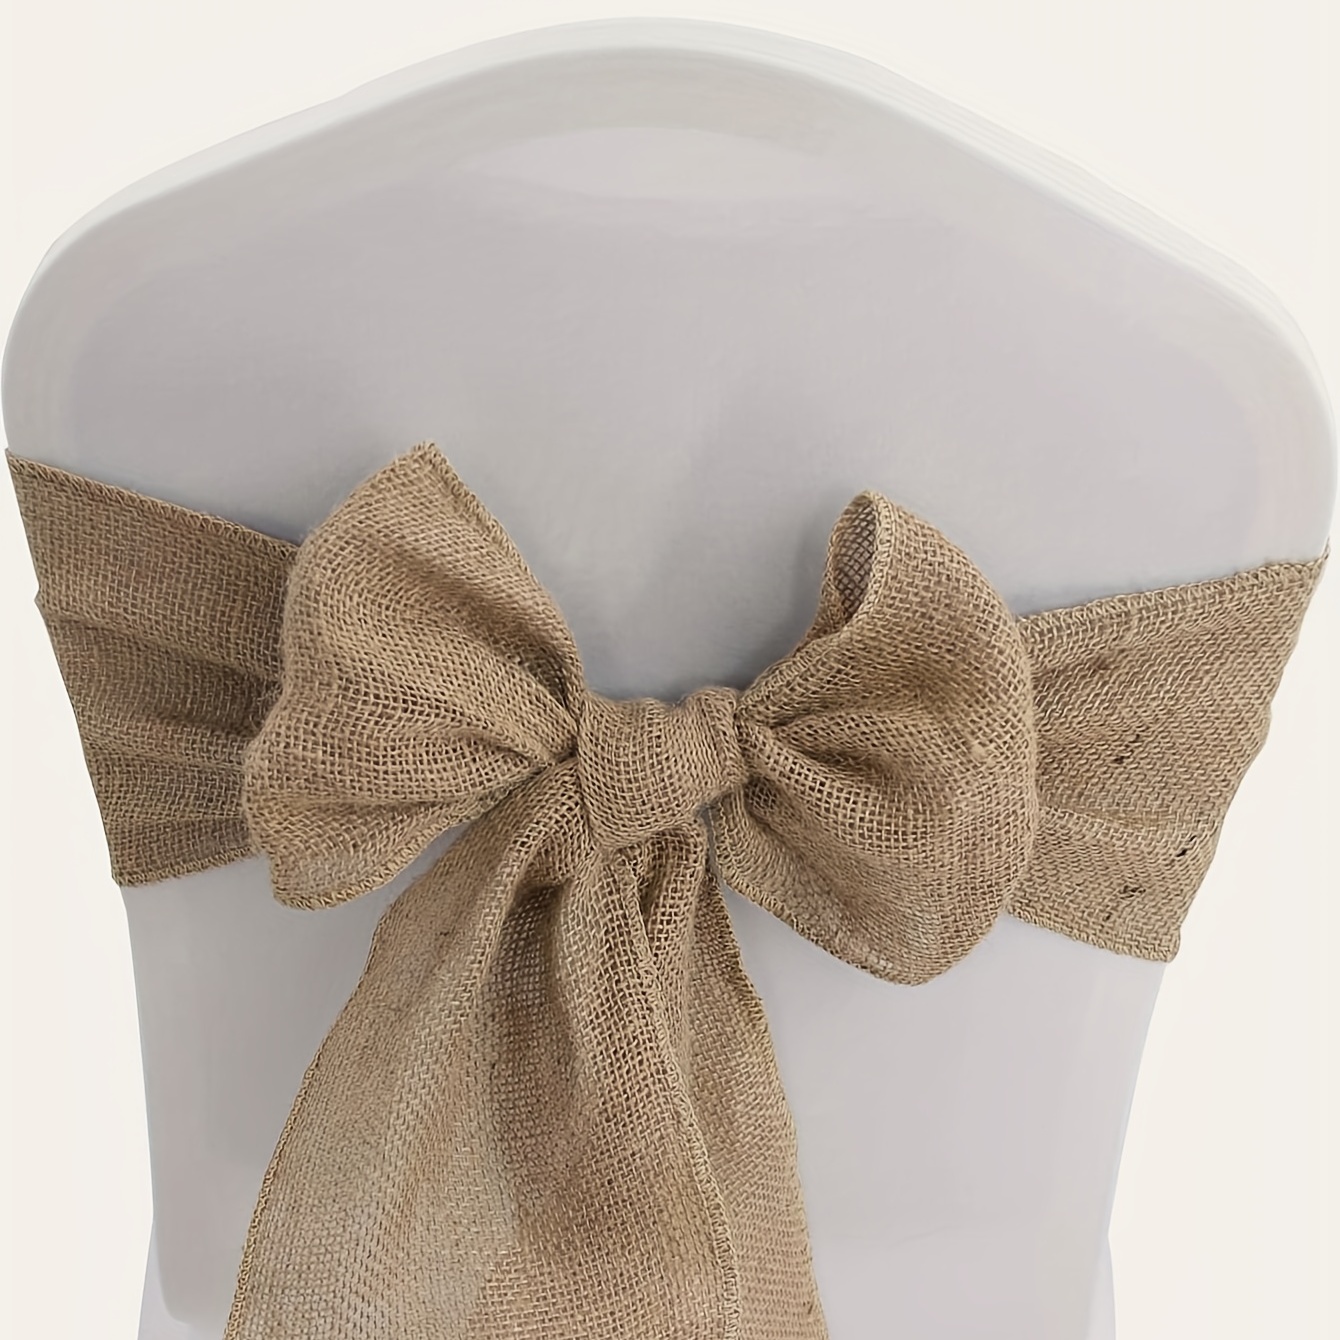 Natural Burlap Bow Rustic Jute Bows Christmas Tree Topper Burlap Bows for Wedding Crafts Farmhouse Decor Holiday Fall Decor Christmas Decorations